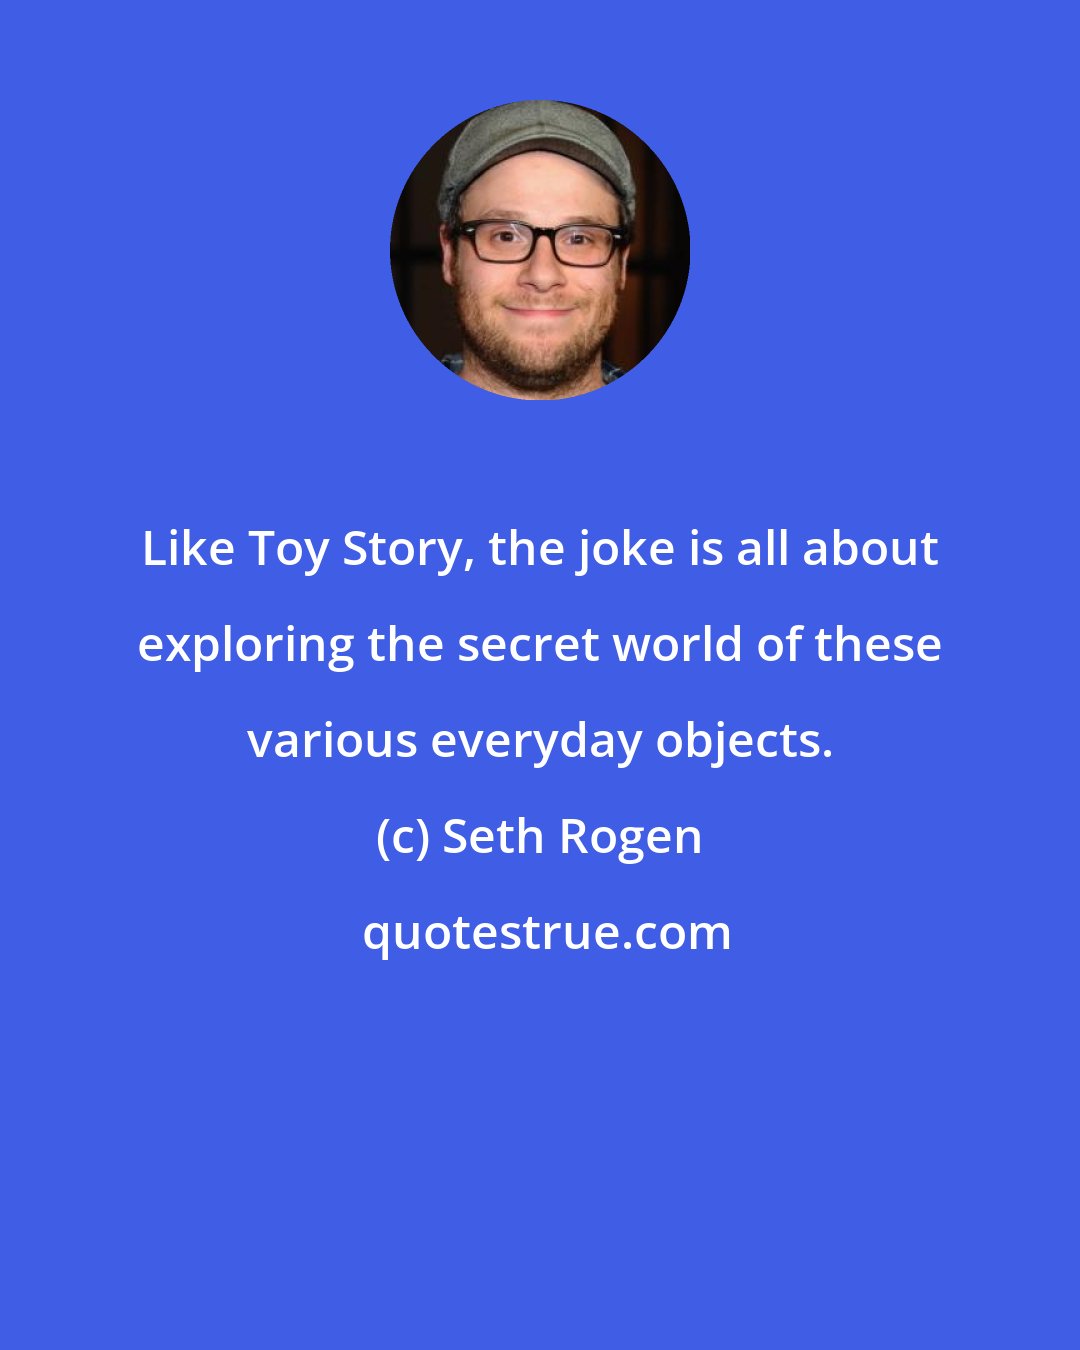 Seth Rogen: Like Toy Story, the joke is all about exploring the secret world of these various everyday objects.